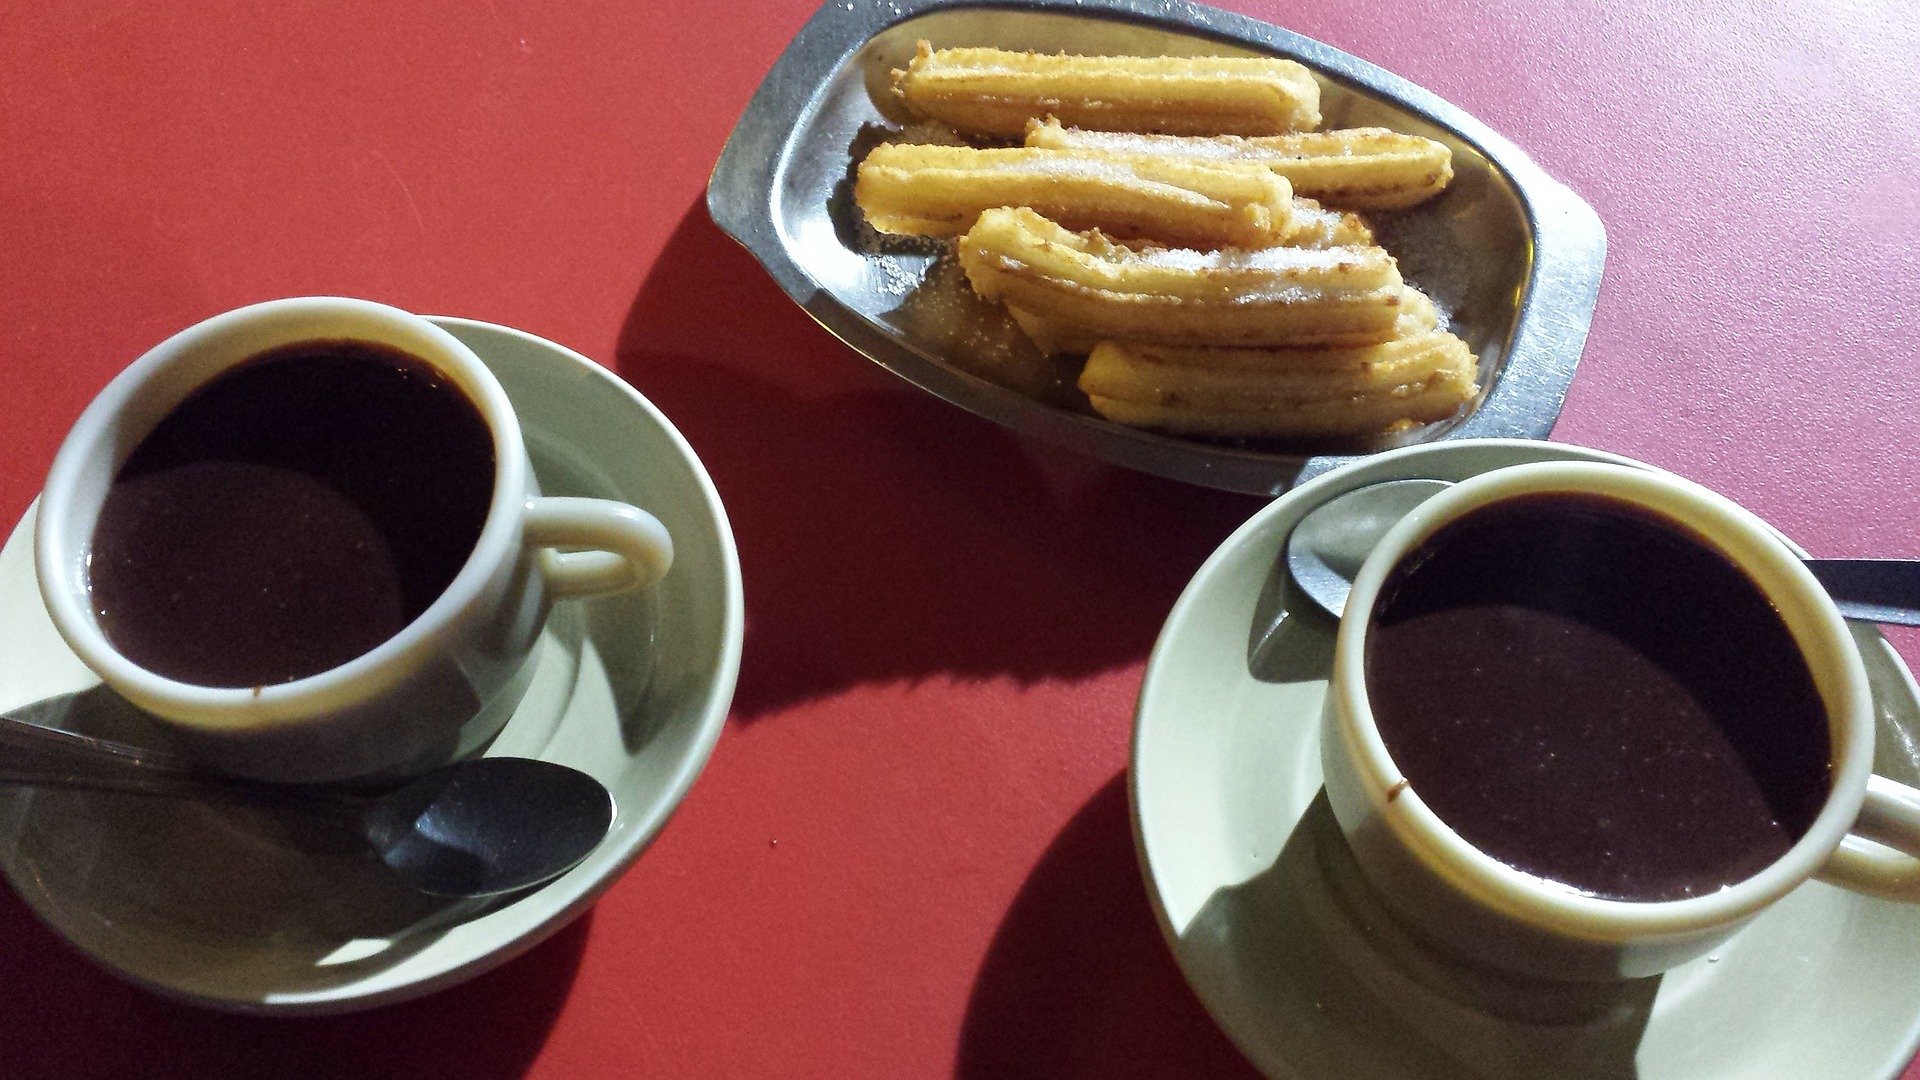 tipping in spain churros one day in Malaga spend 2 days in madrid visiting madrid alone churros con chocolate